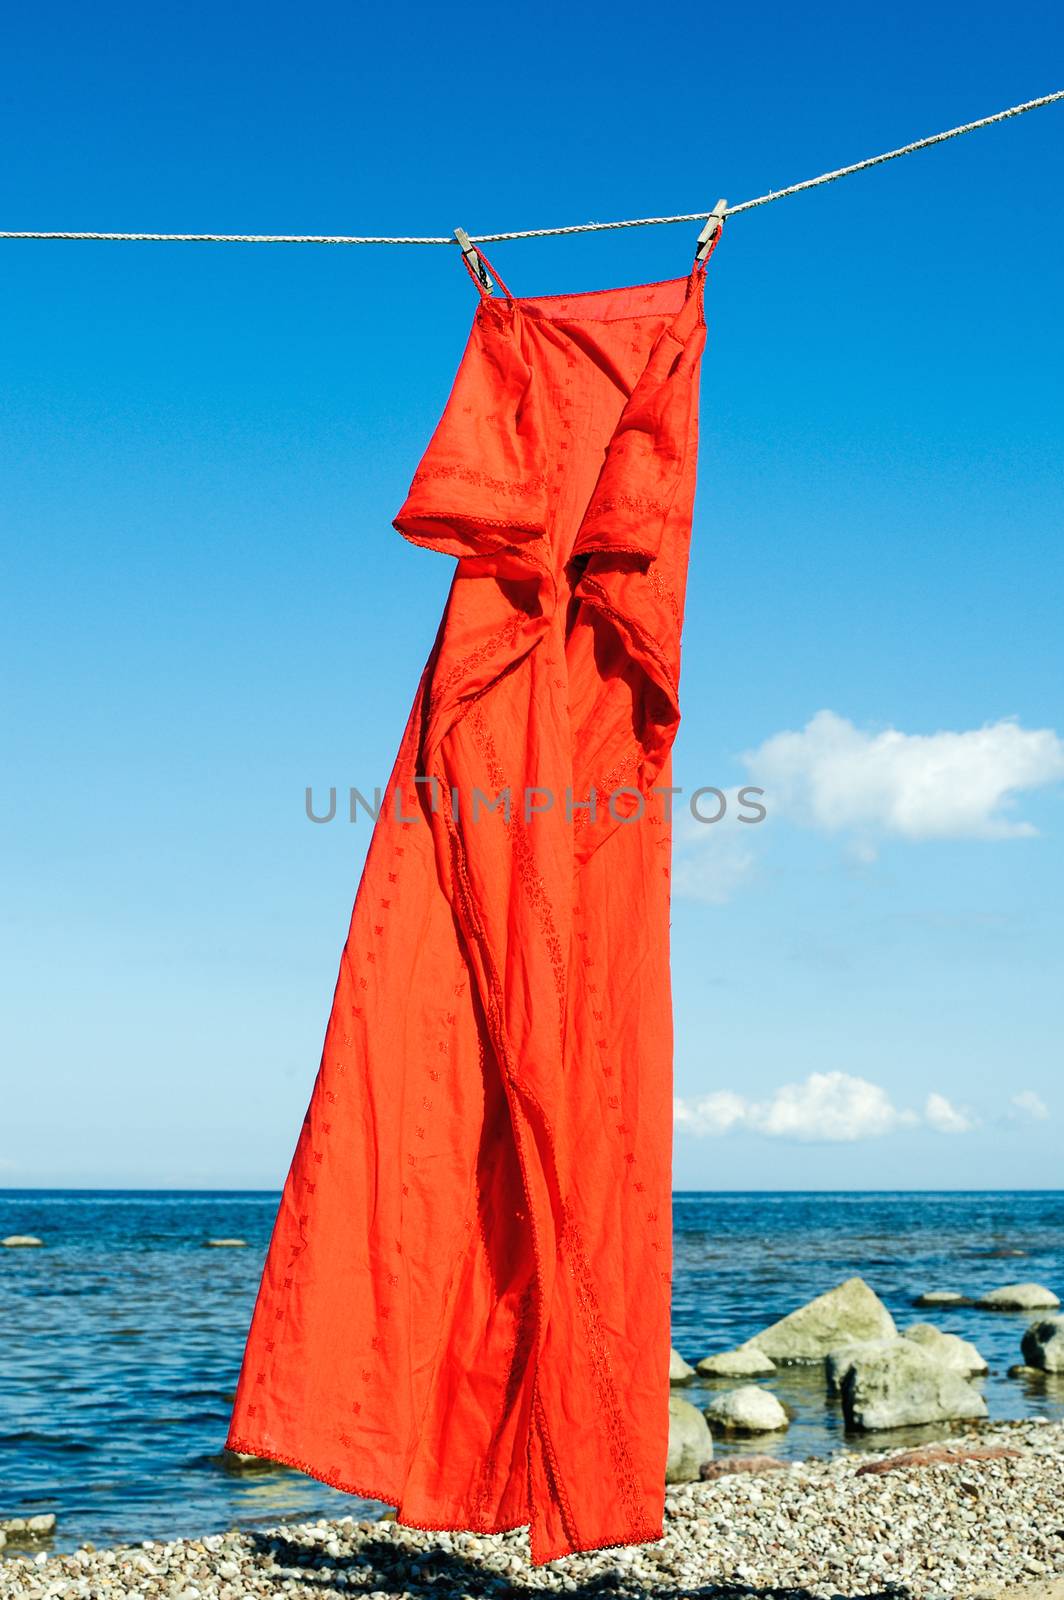 Red sundress hanging on a rope on the seashore